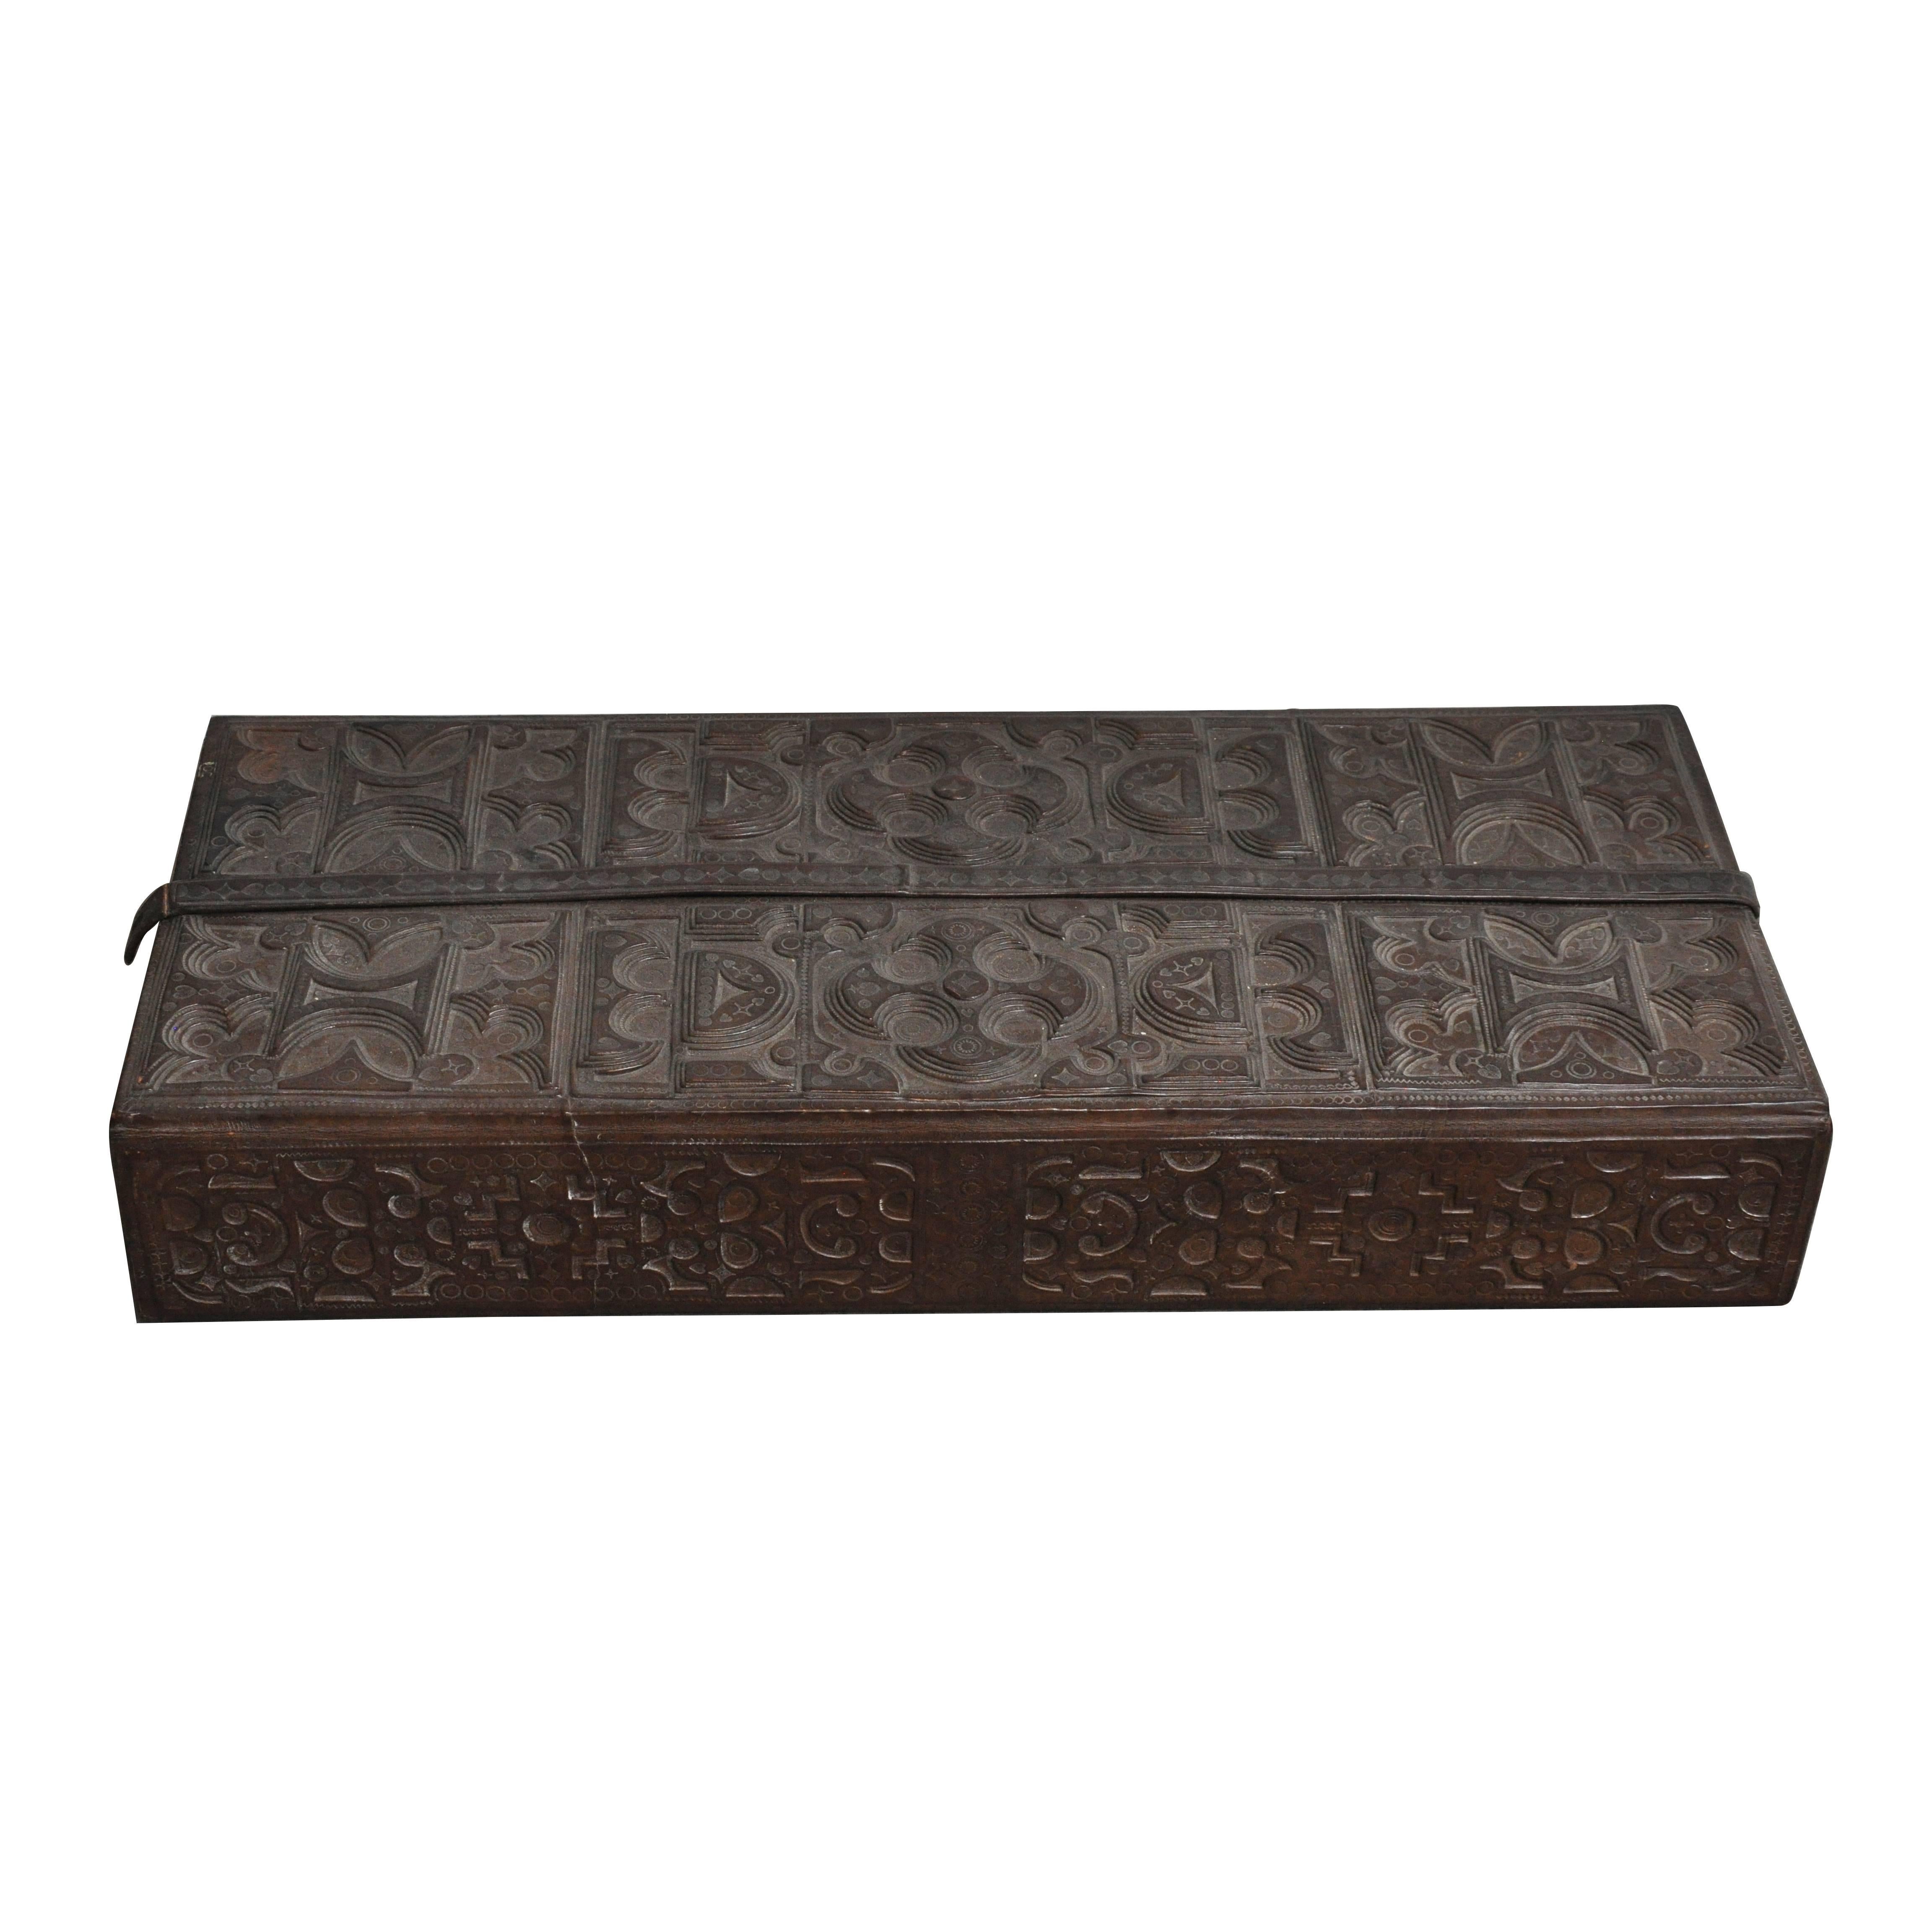 Early 20th Century Tooled Leather Box from Morocco For Sale